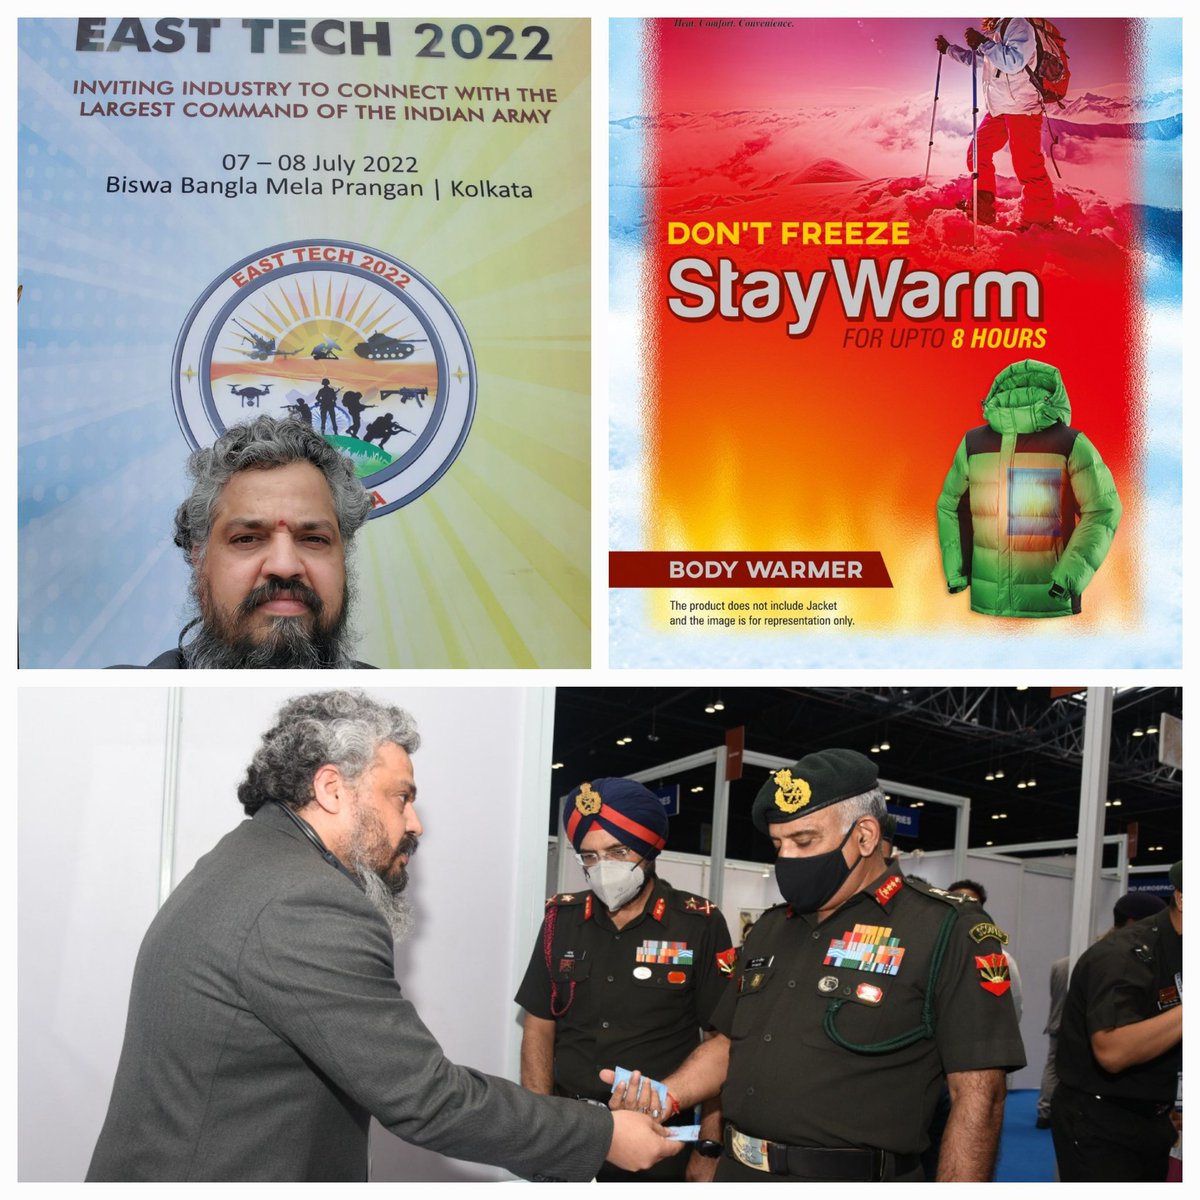 It was an honour to meet those who protect our nation & demonstrate how they can #beatthechill & #StayWarm with 100% #MadeInIndia solutions Thank you @easterncomd @SIDMIndia @FollowCII #MakeInIndia #AtmaNirbharBharat @adgpi @sastra_india @IKP_SciencePark @parisodhana @India_iDEX